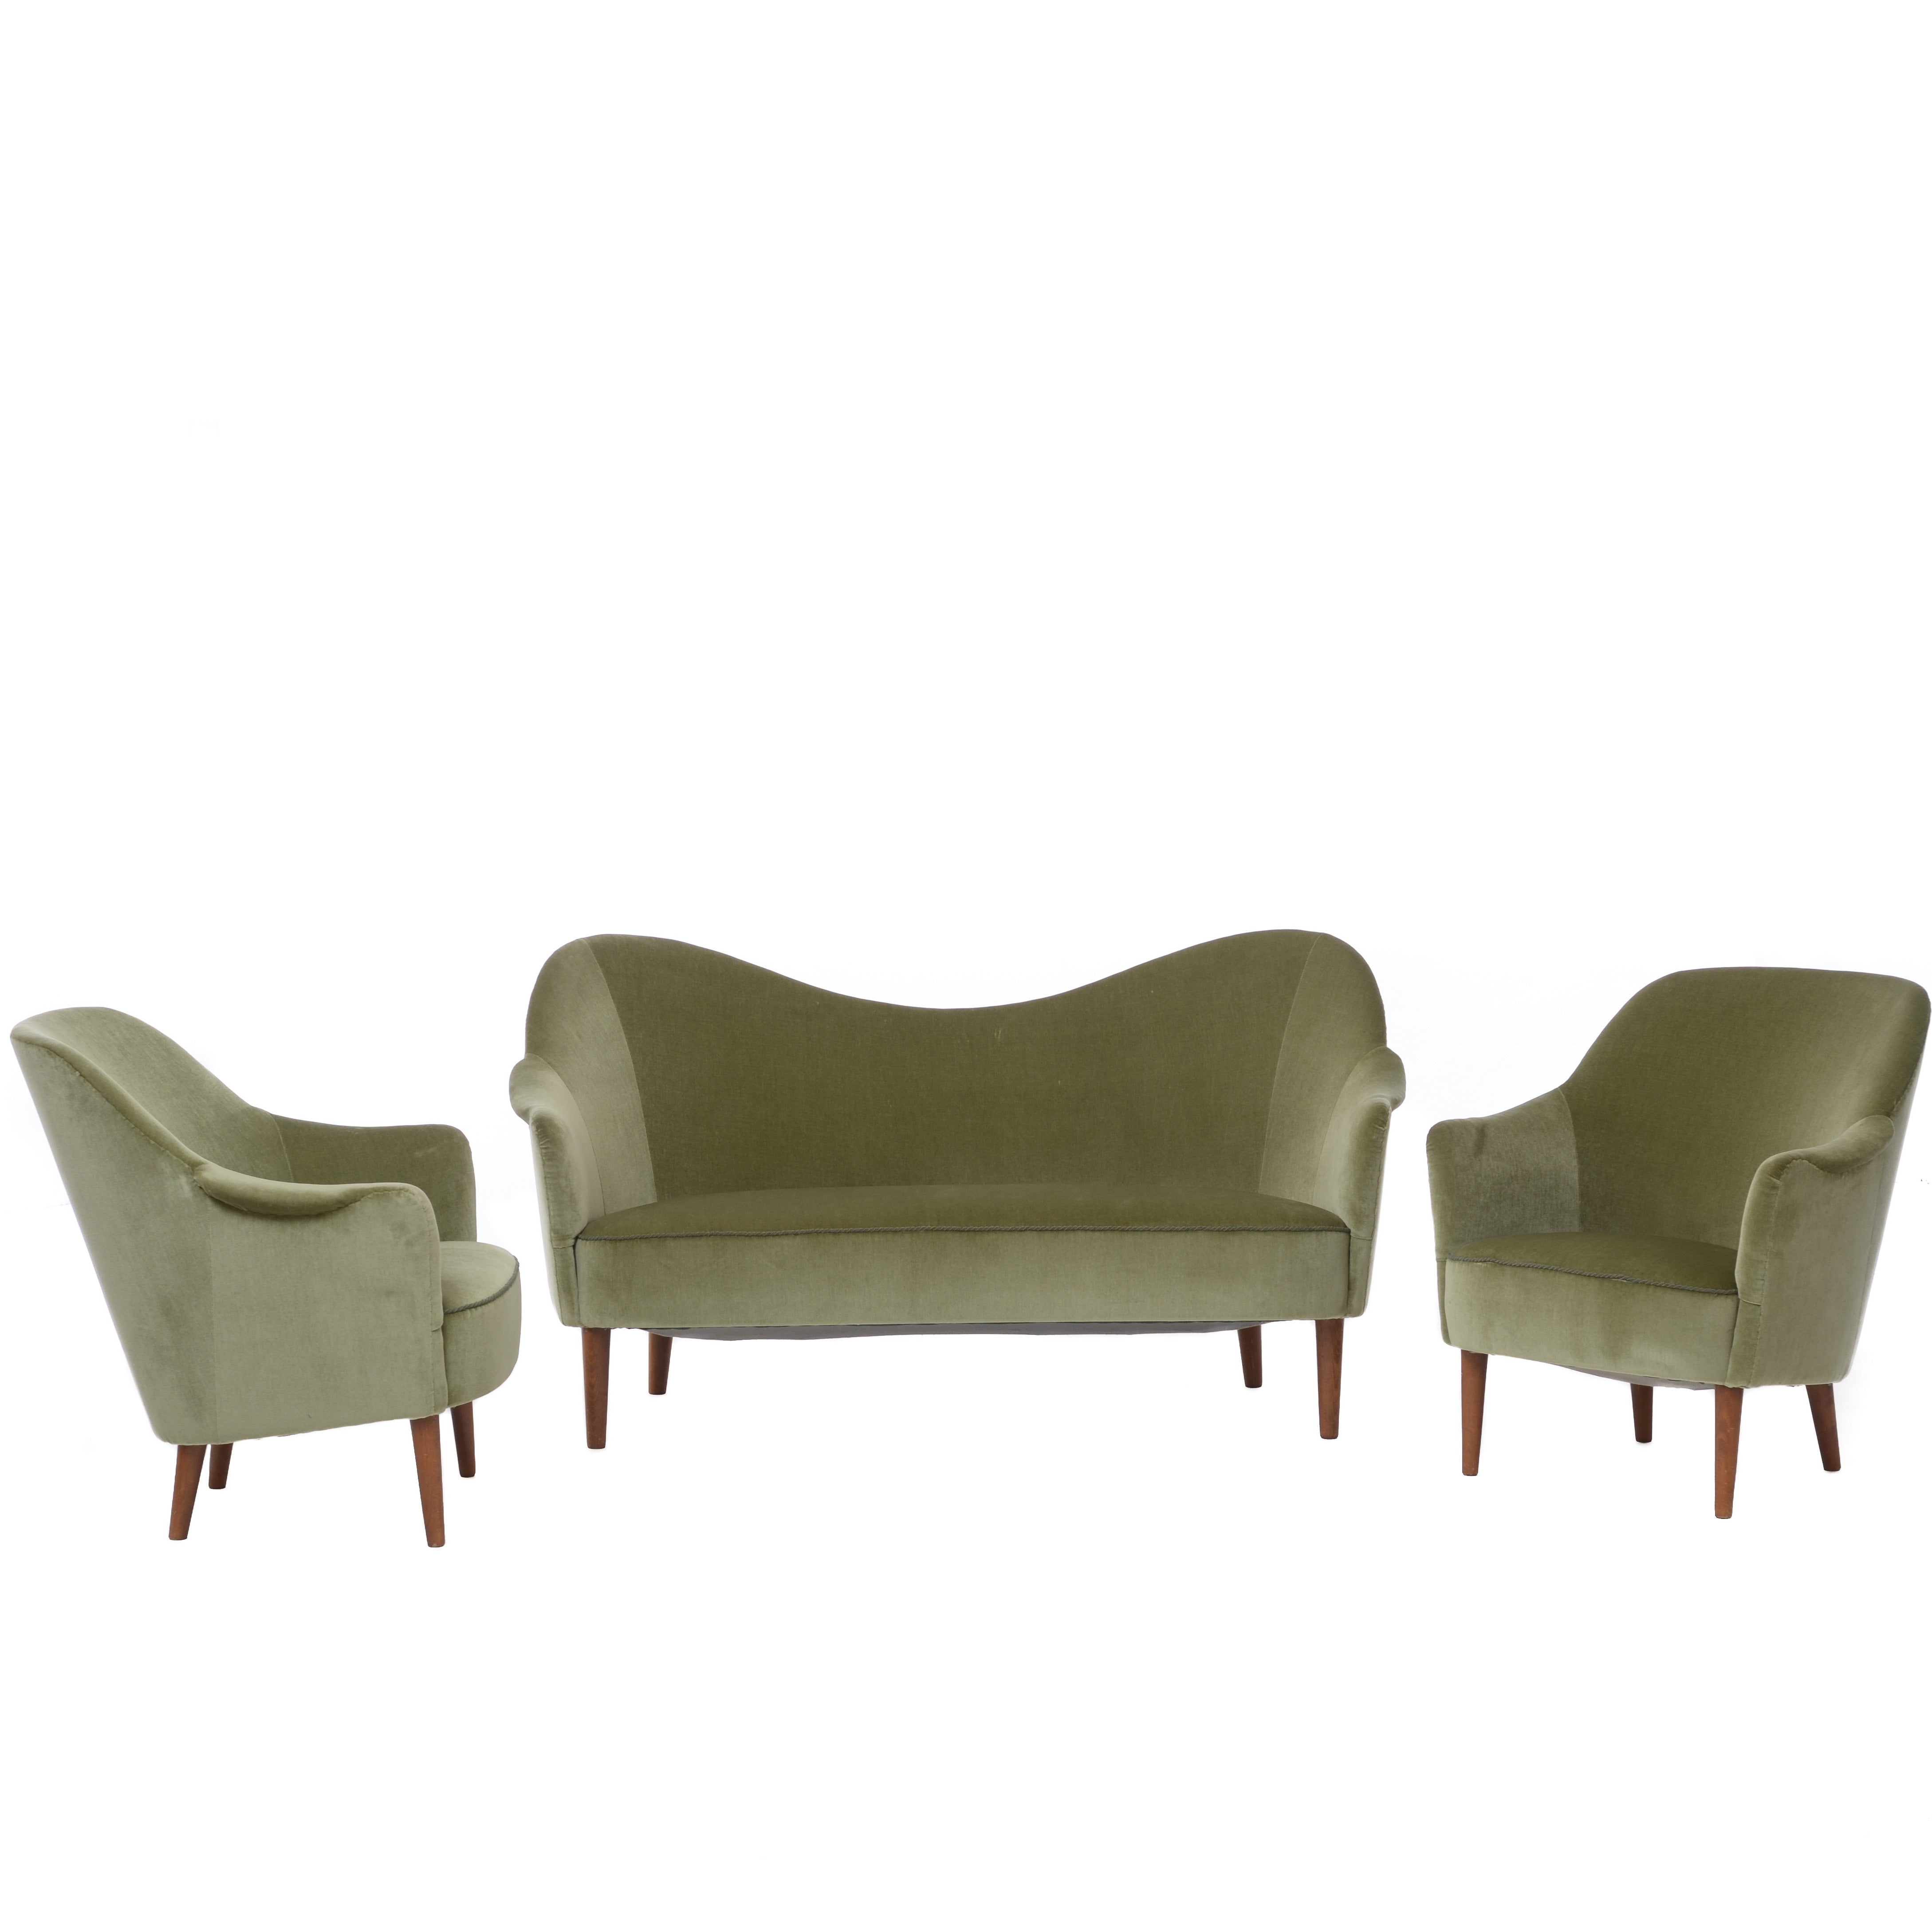 'Samspel' Swedish Modern Parlor Settle and Lounge Chairs